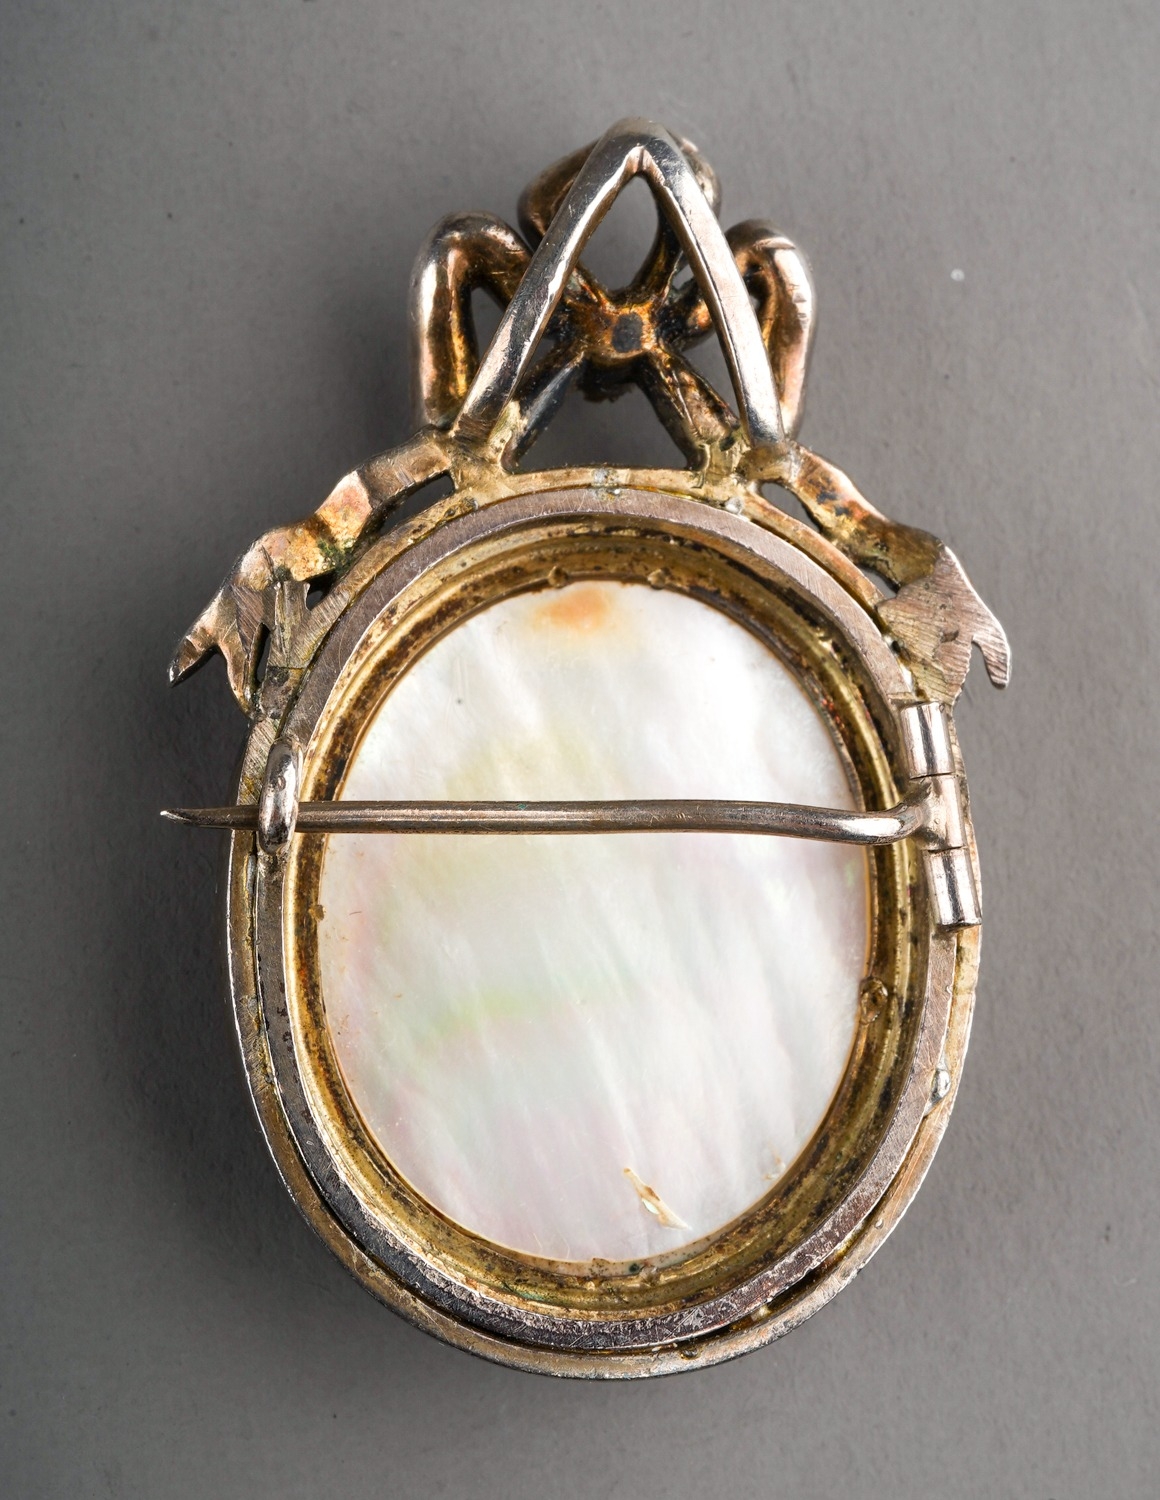 A continental silver brooch, set with a painted porcelain panel depicting cupids, in a seed pearl - Image 2 of 2